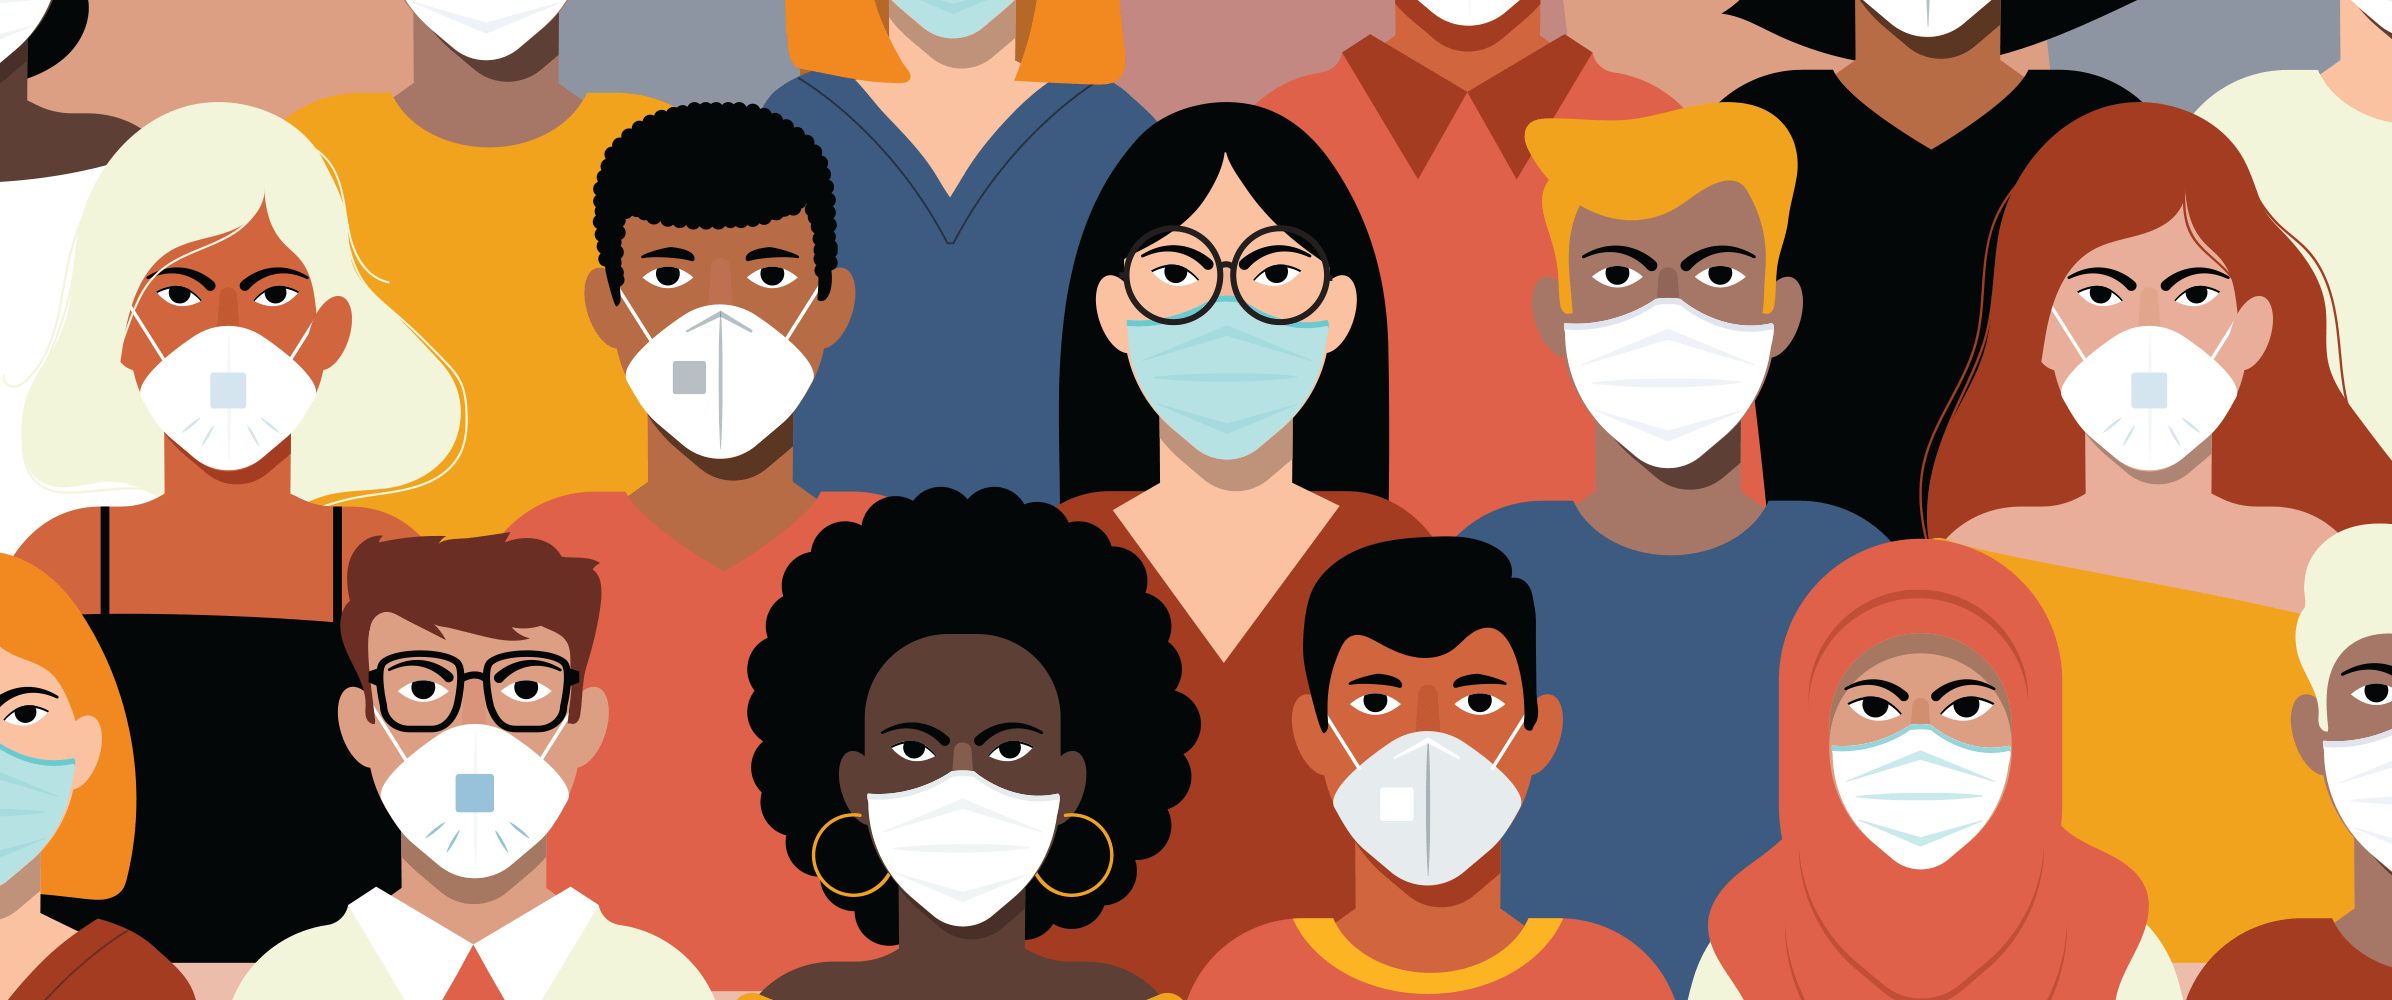 An illustration of people of different colors wearing face masks that cover their mouths and noses